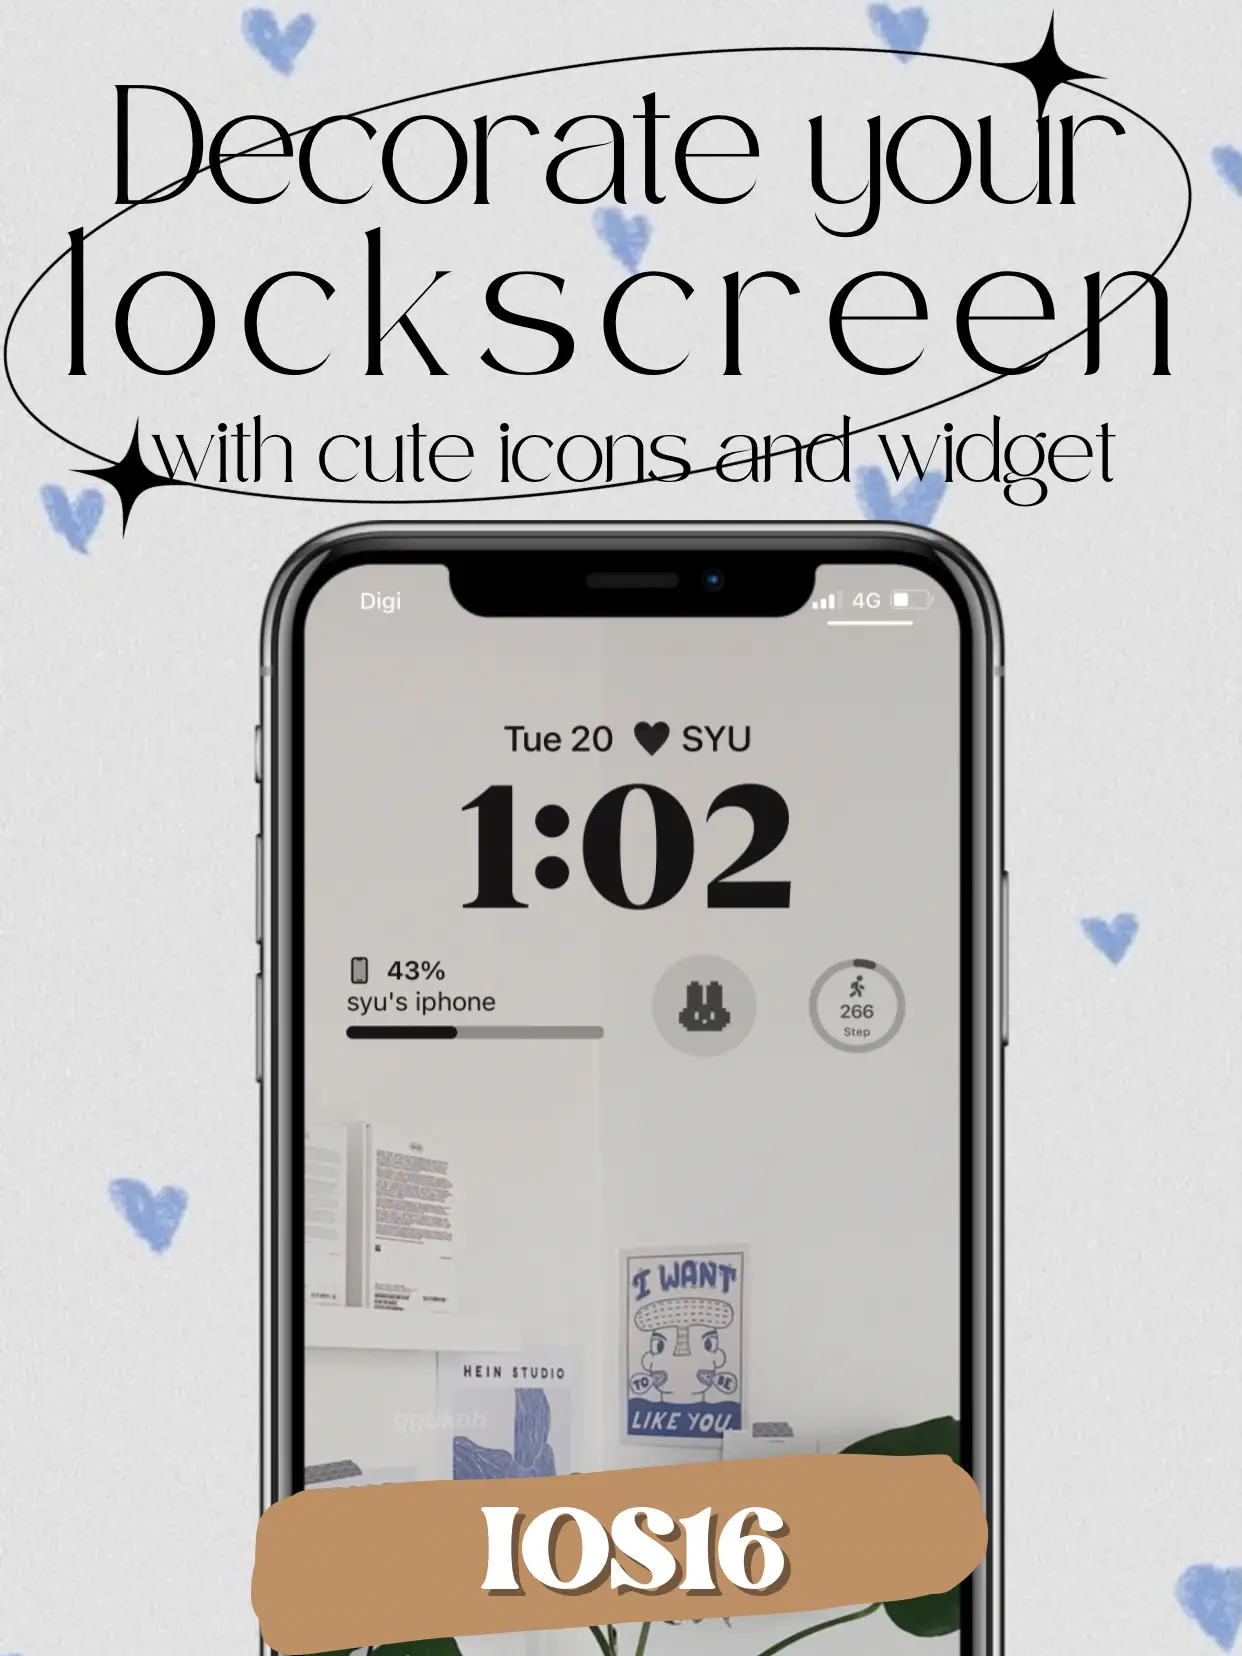 Decorate your lockscreen with cute icons in IOS16 | Bộ sưu tập do ...